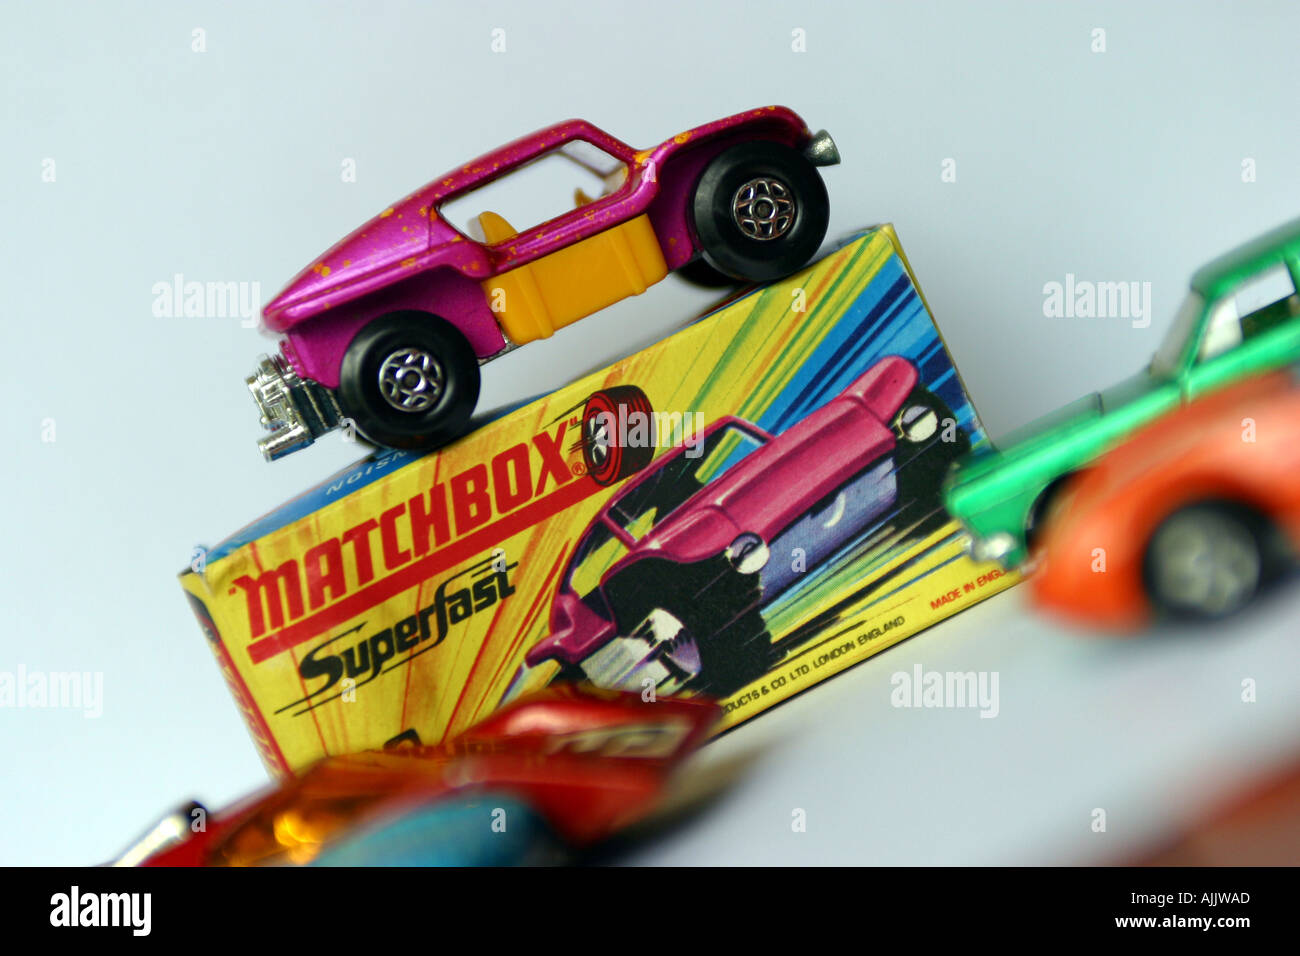 matchbox toy car with packaging Stock Photo